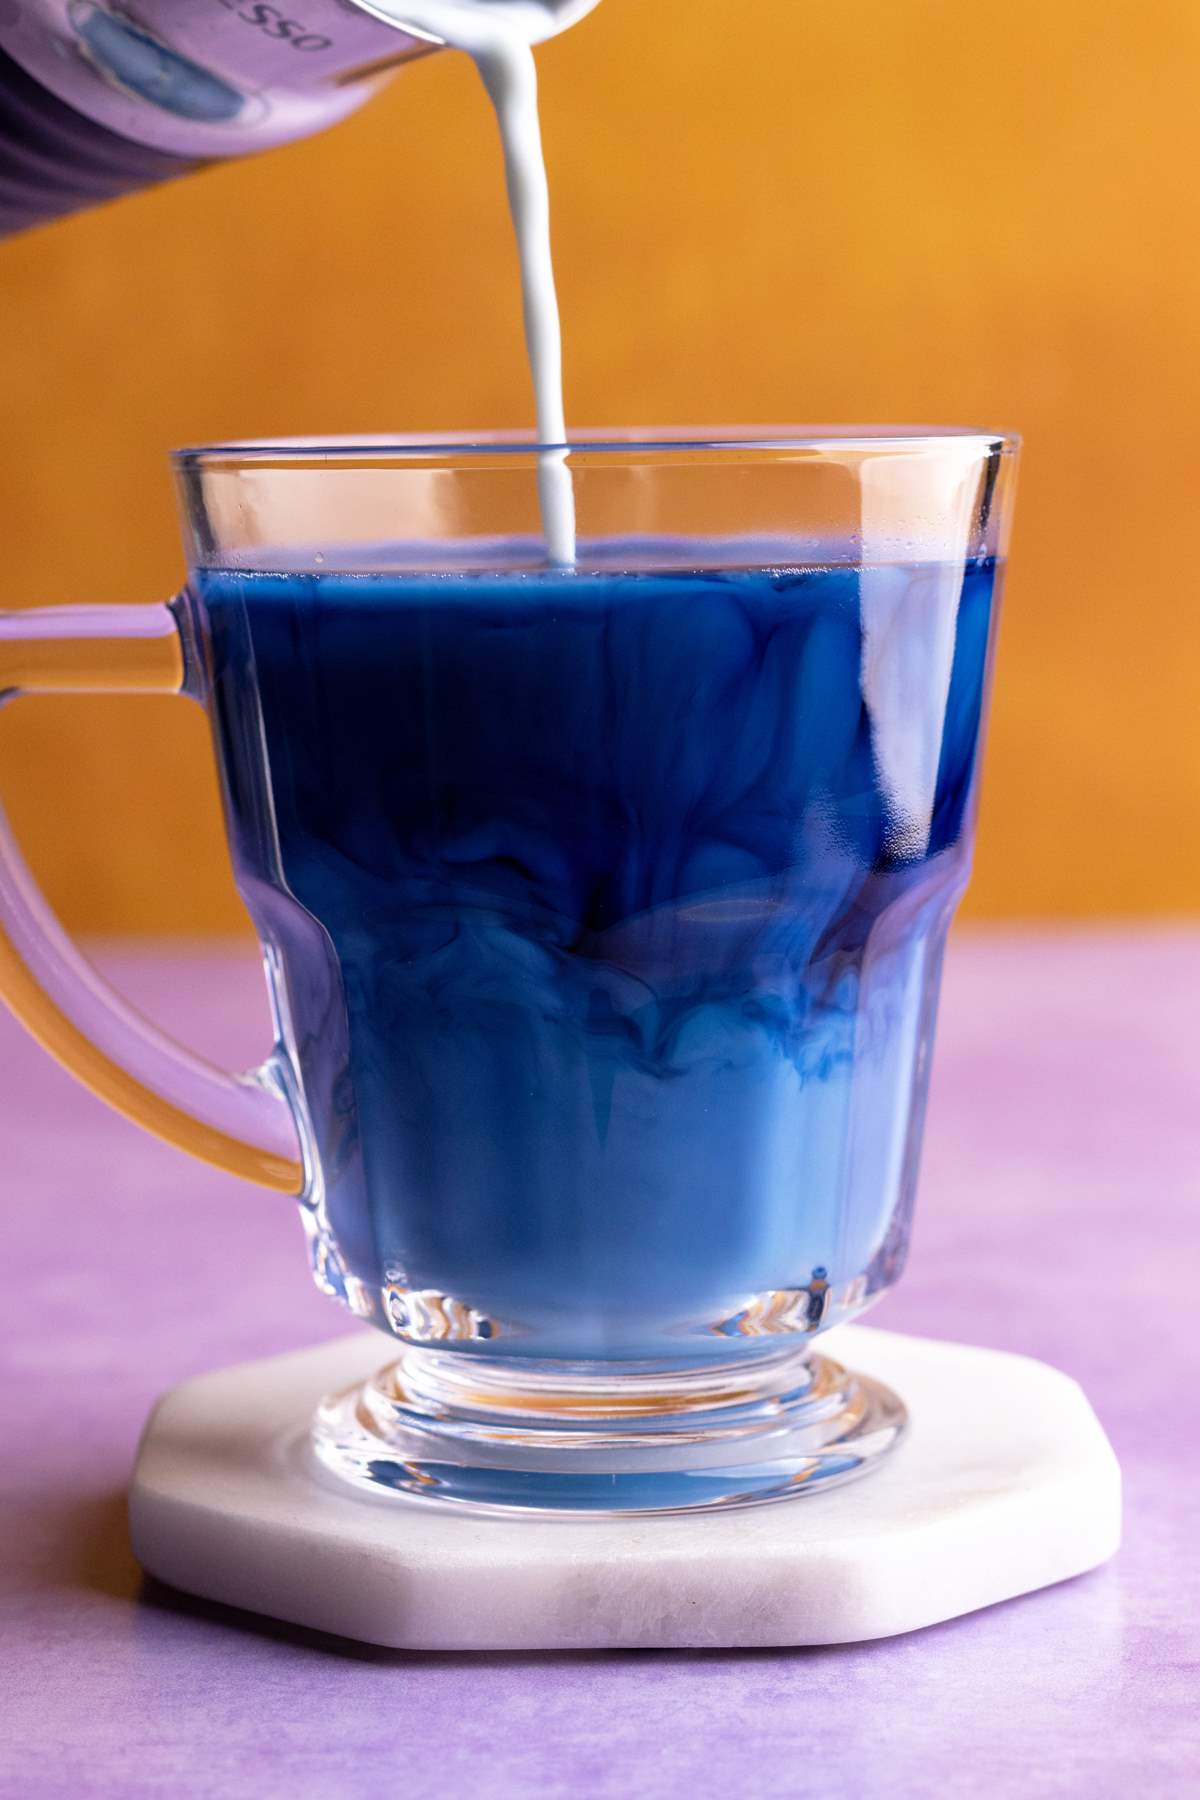 Butterfly pea latte pouring into glass mug.